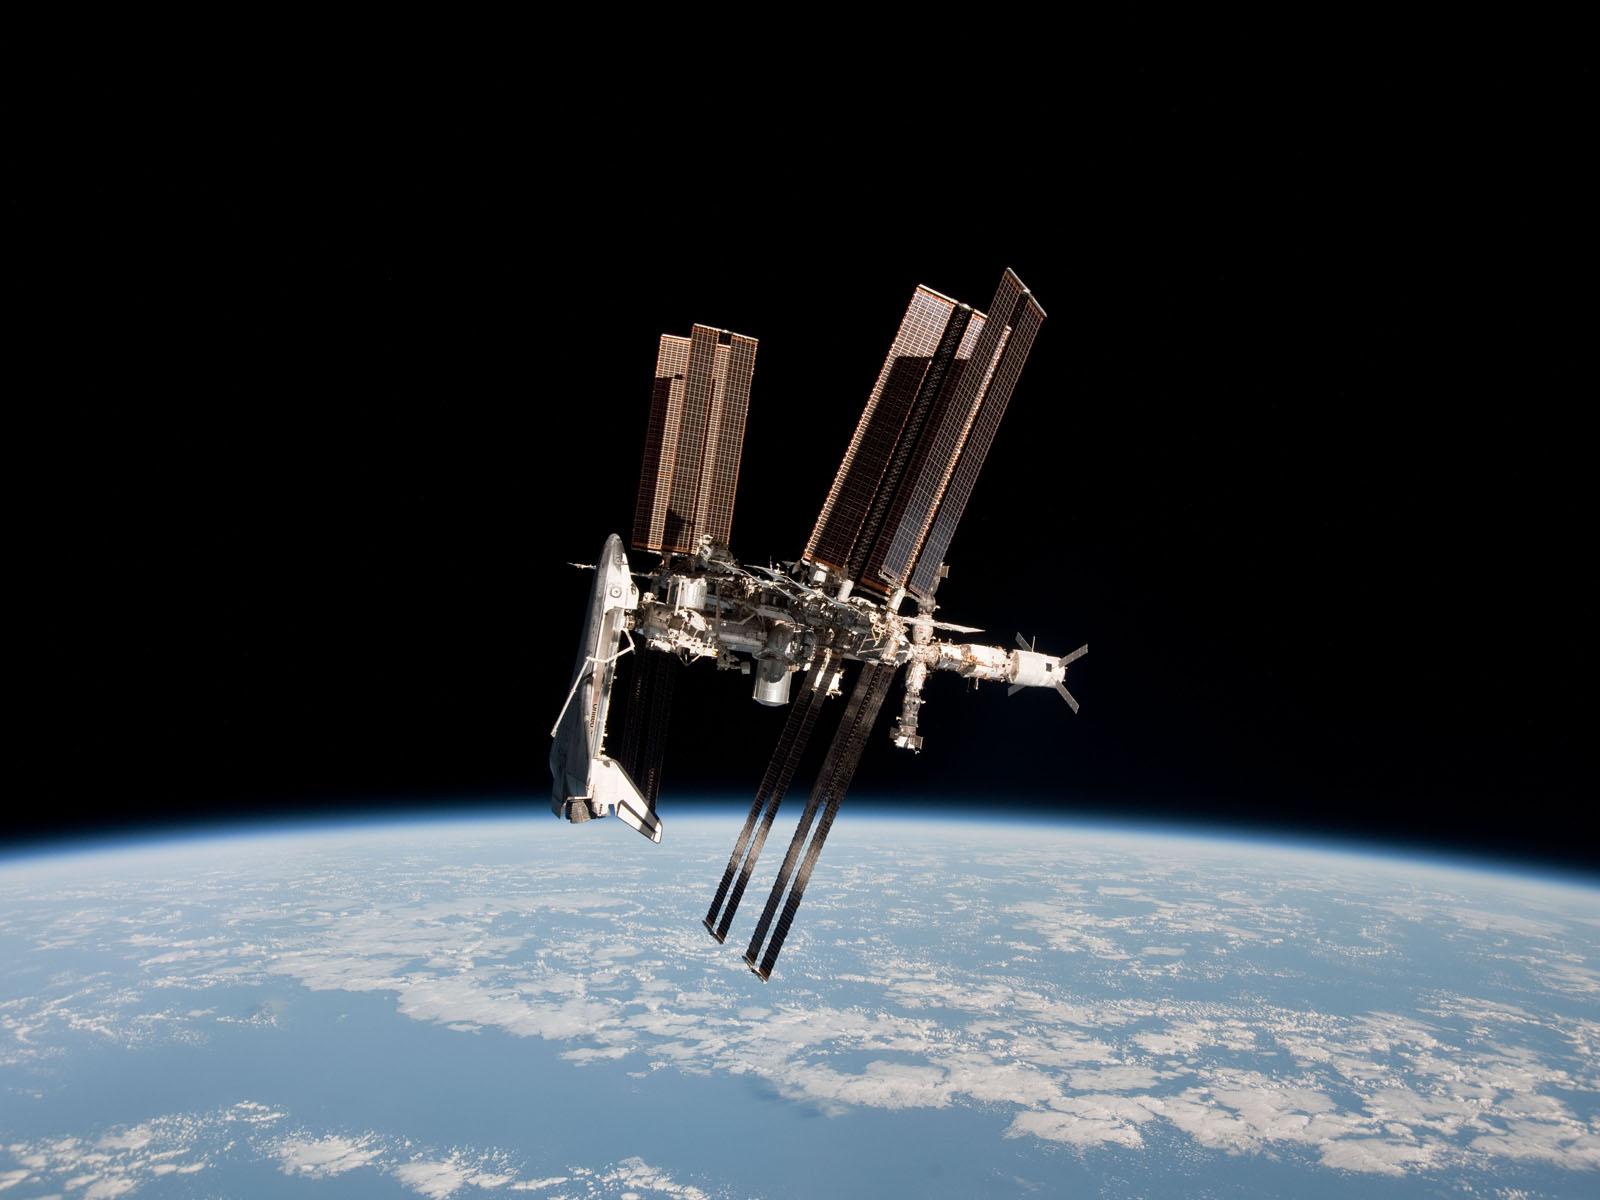 When it all goes right: shuttle at ISS